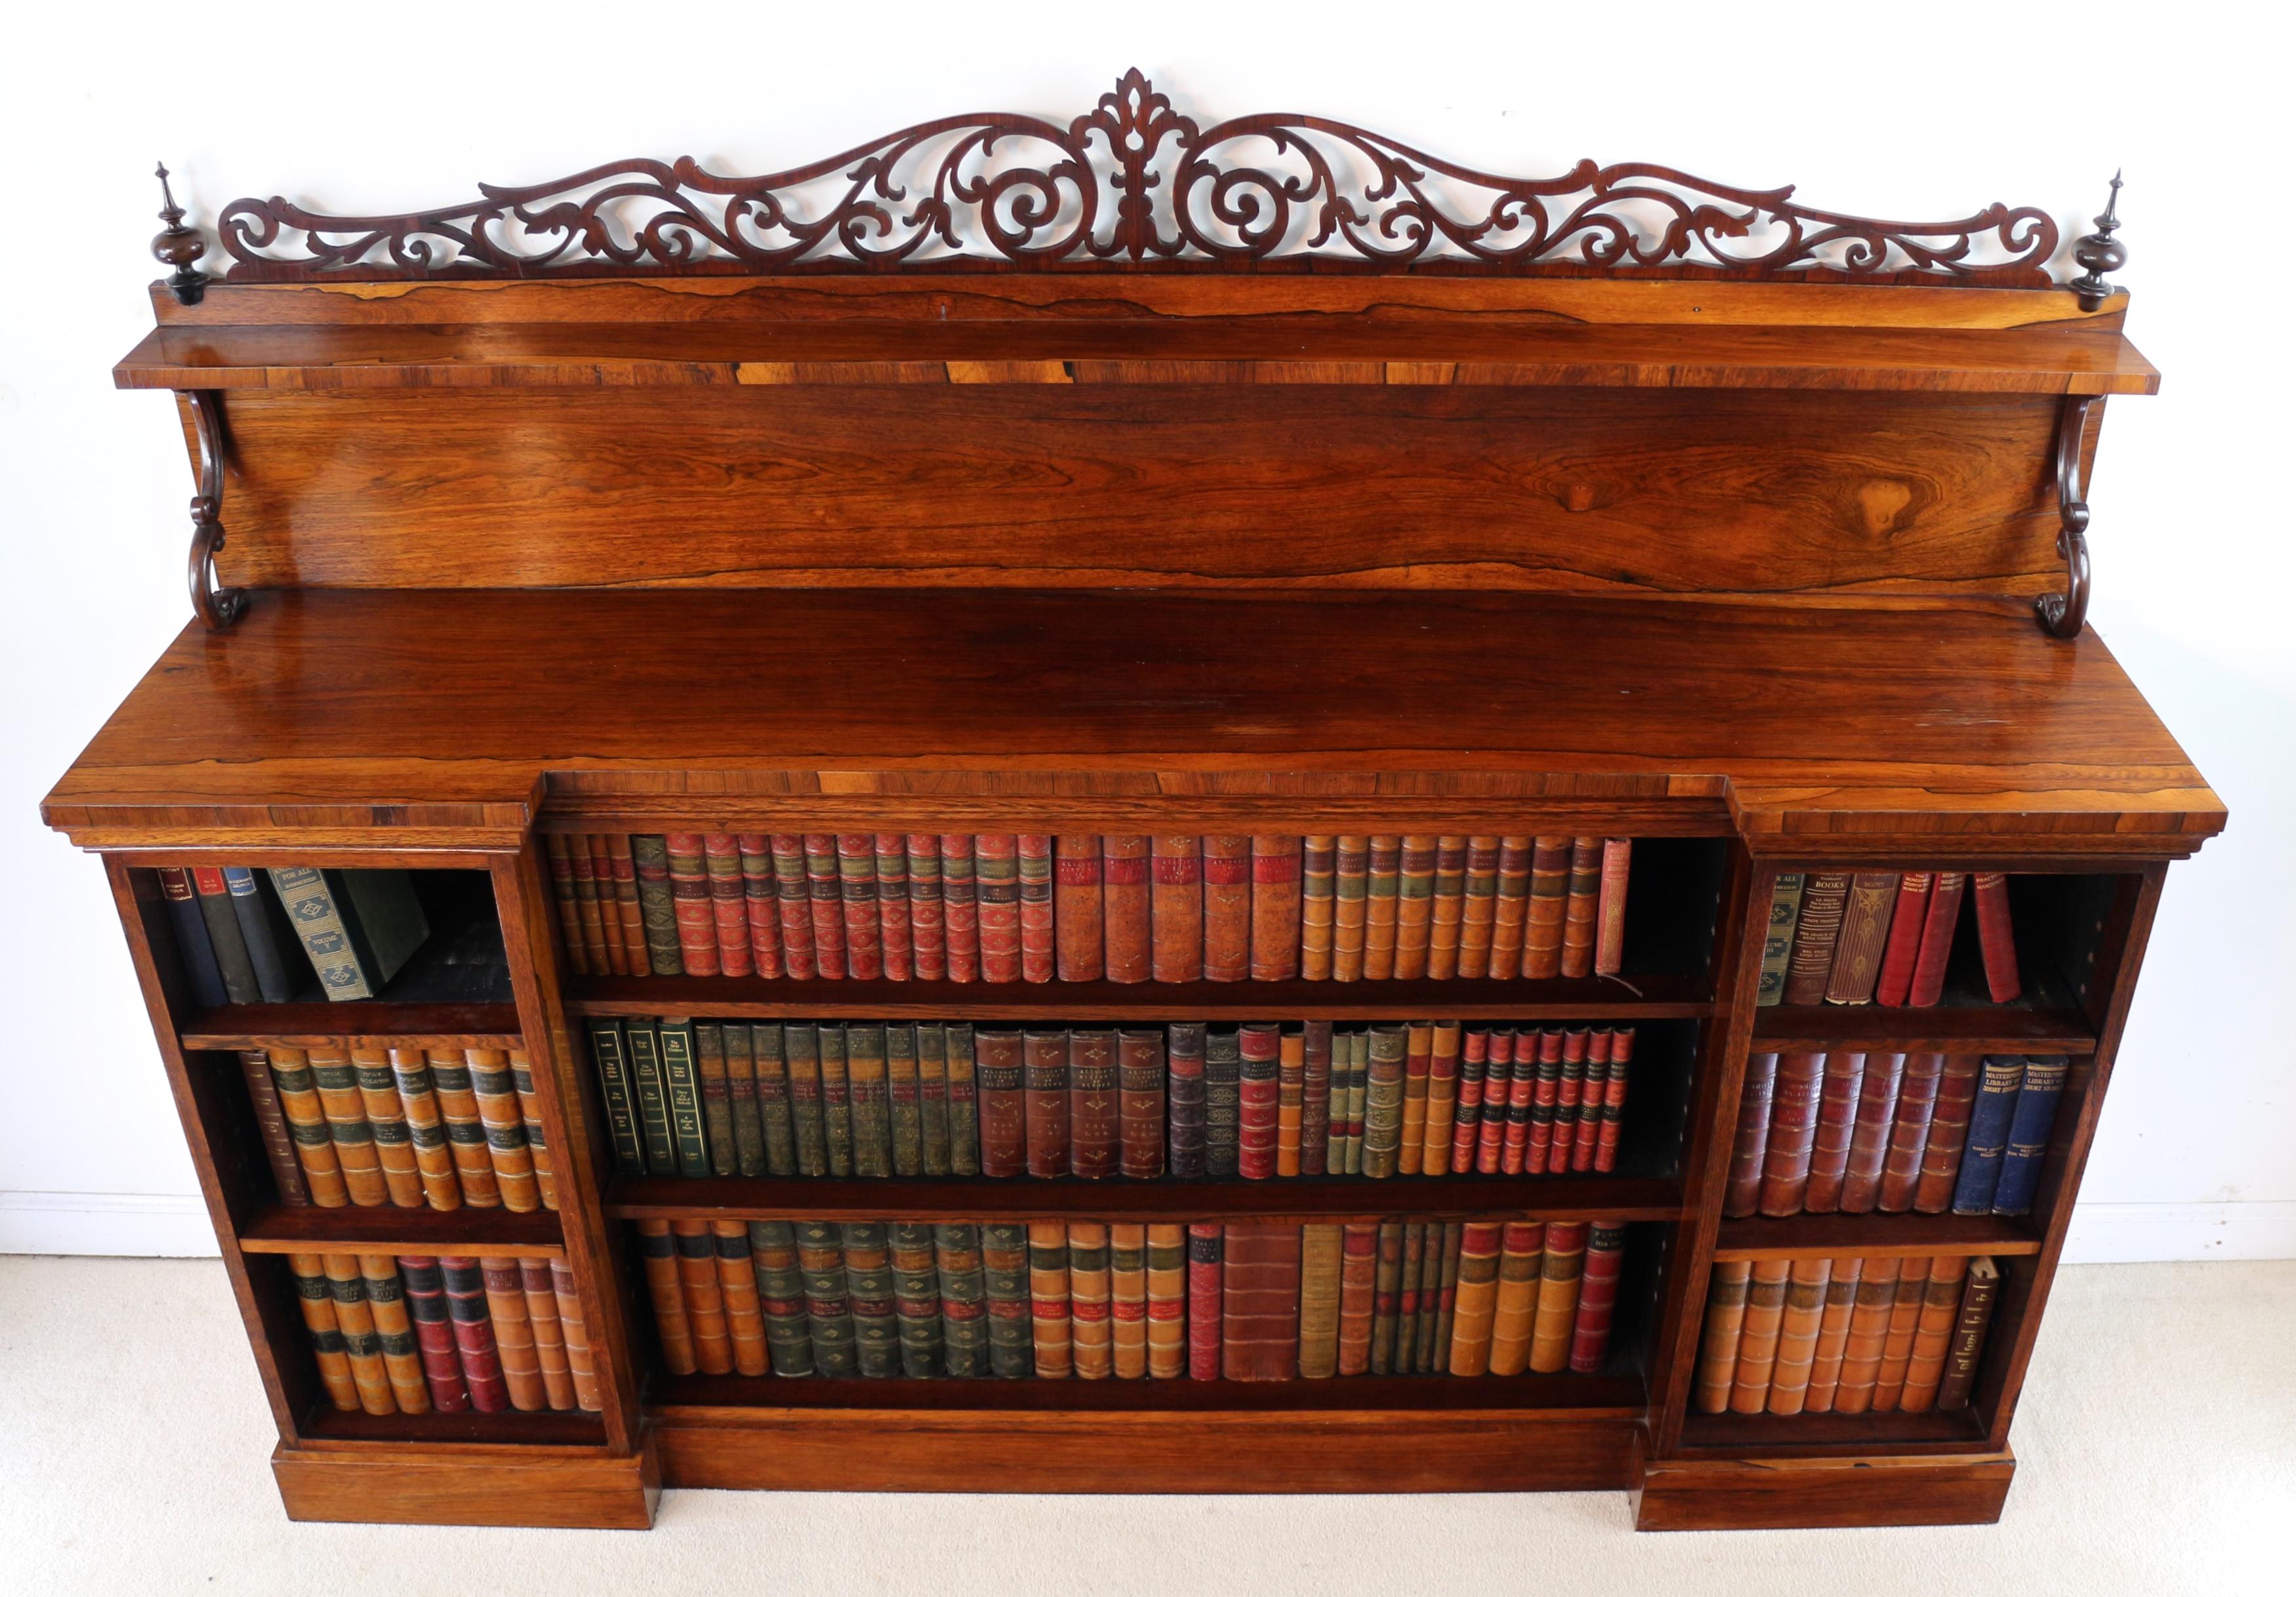 Antique English Regency Indian Rosewood Inverted Breakfront Bookcase In Good Condition For Sale In Glasgow, GB